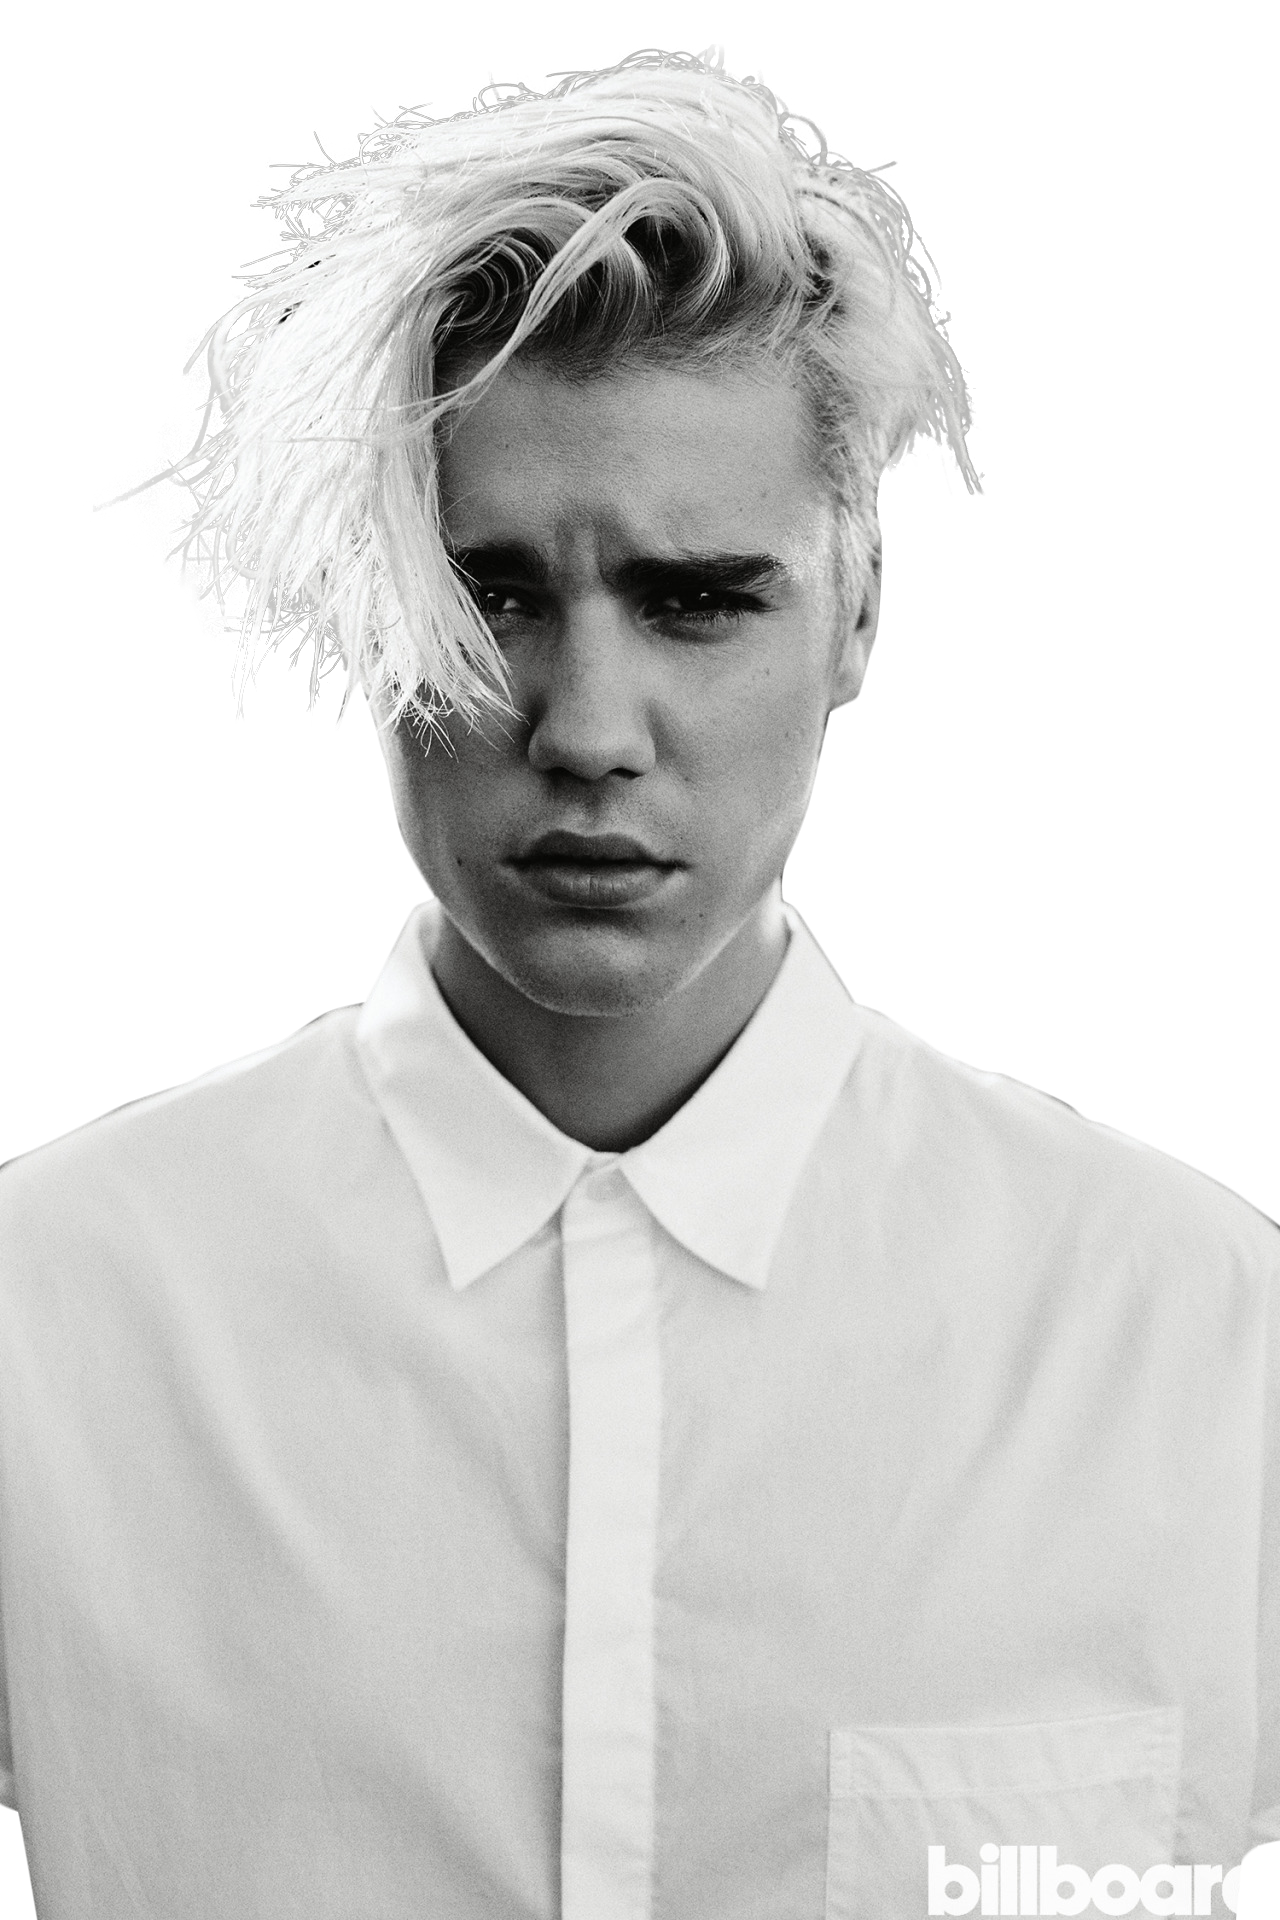 Justin Bieber Black and White PNG Image